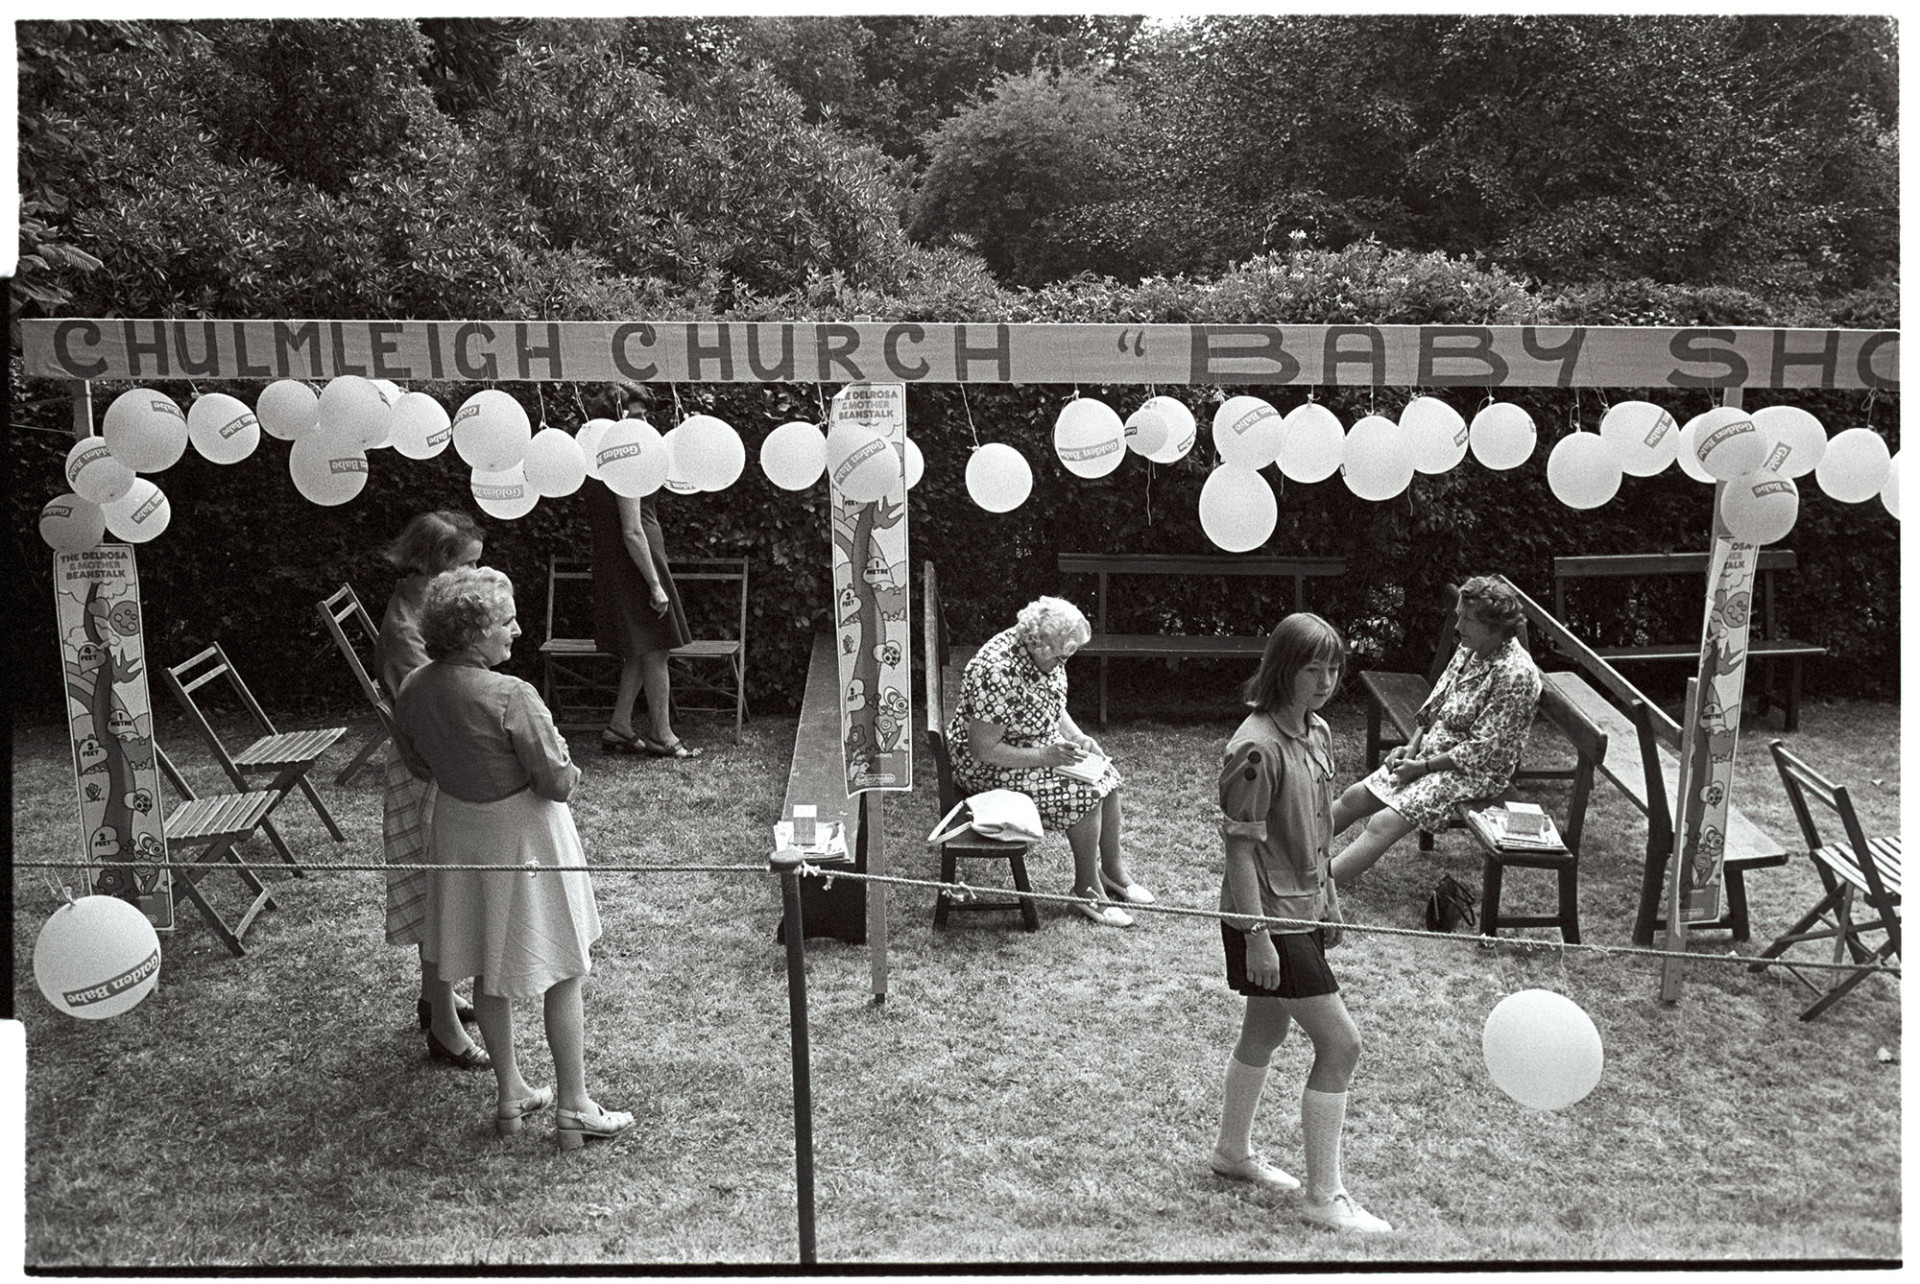 Church Garden Party, arena for baby show with balloons.
[Six women in the balloon decorated area for the baby show at the Chulmleigh Church Garden Party at Chulmleigh Vicarage. Some of the women are sat on benches.]